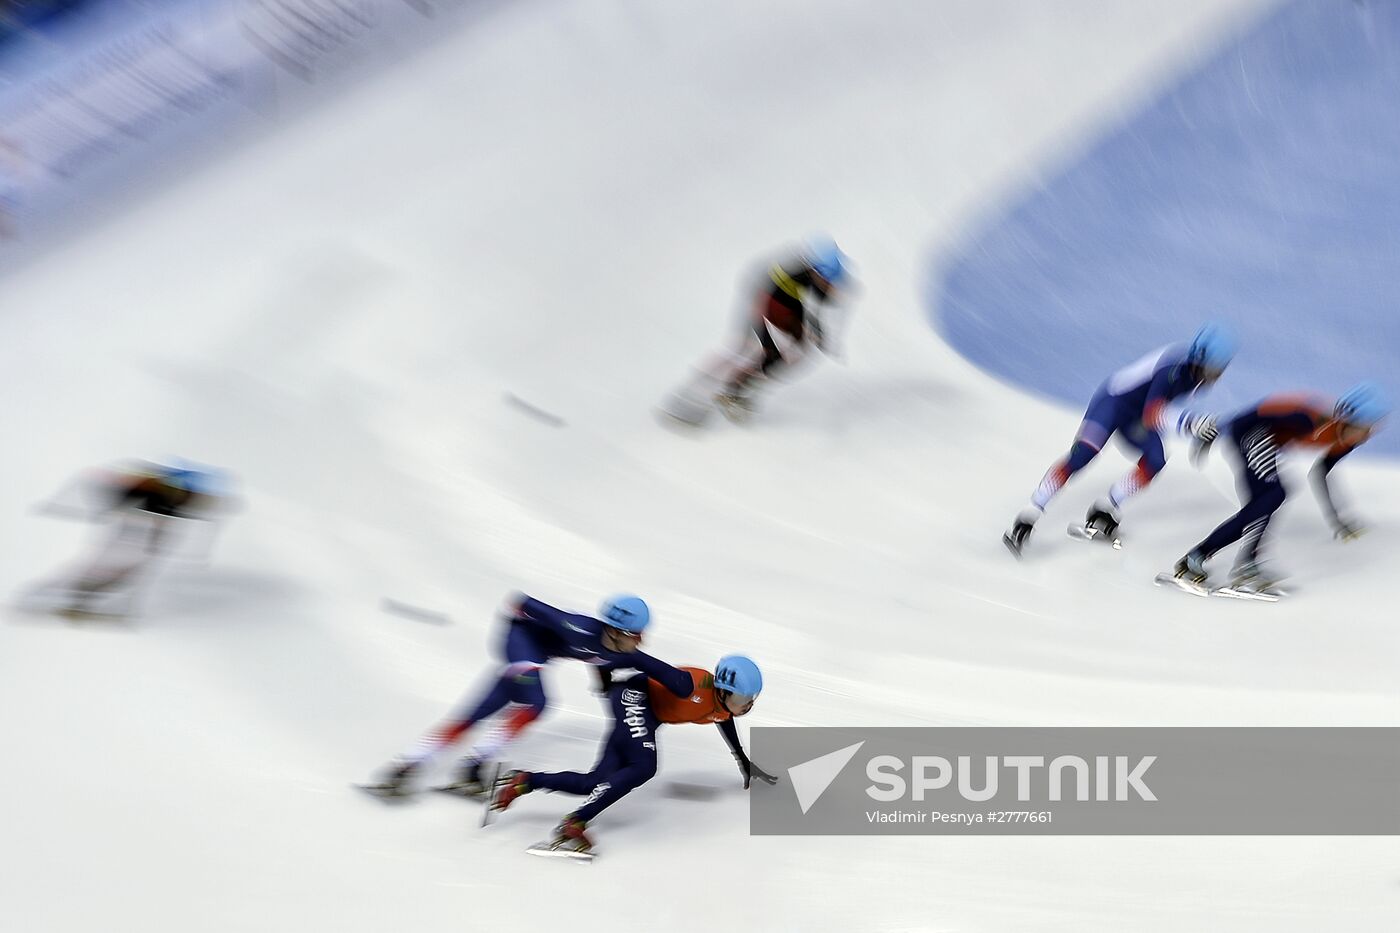 European Short Track Speed Skating Championships. Day One